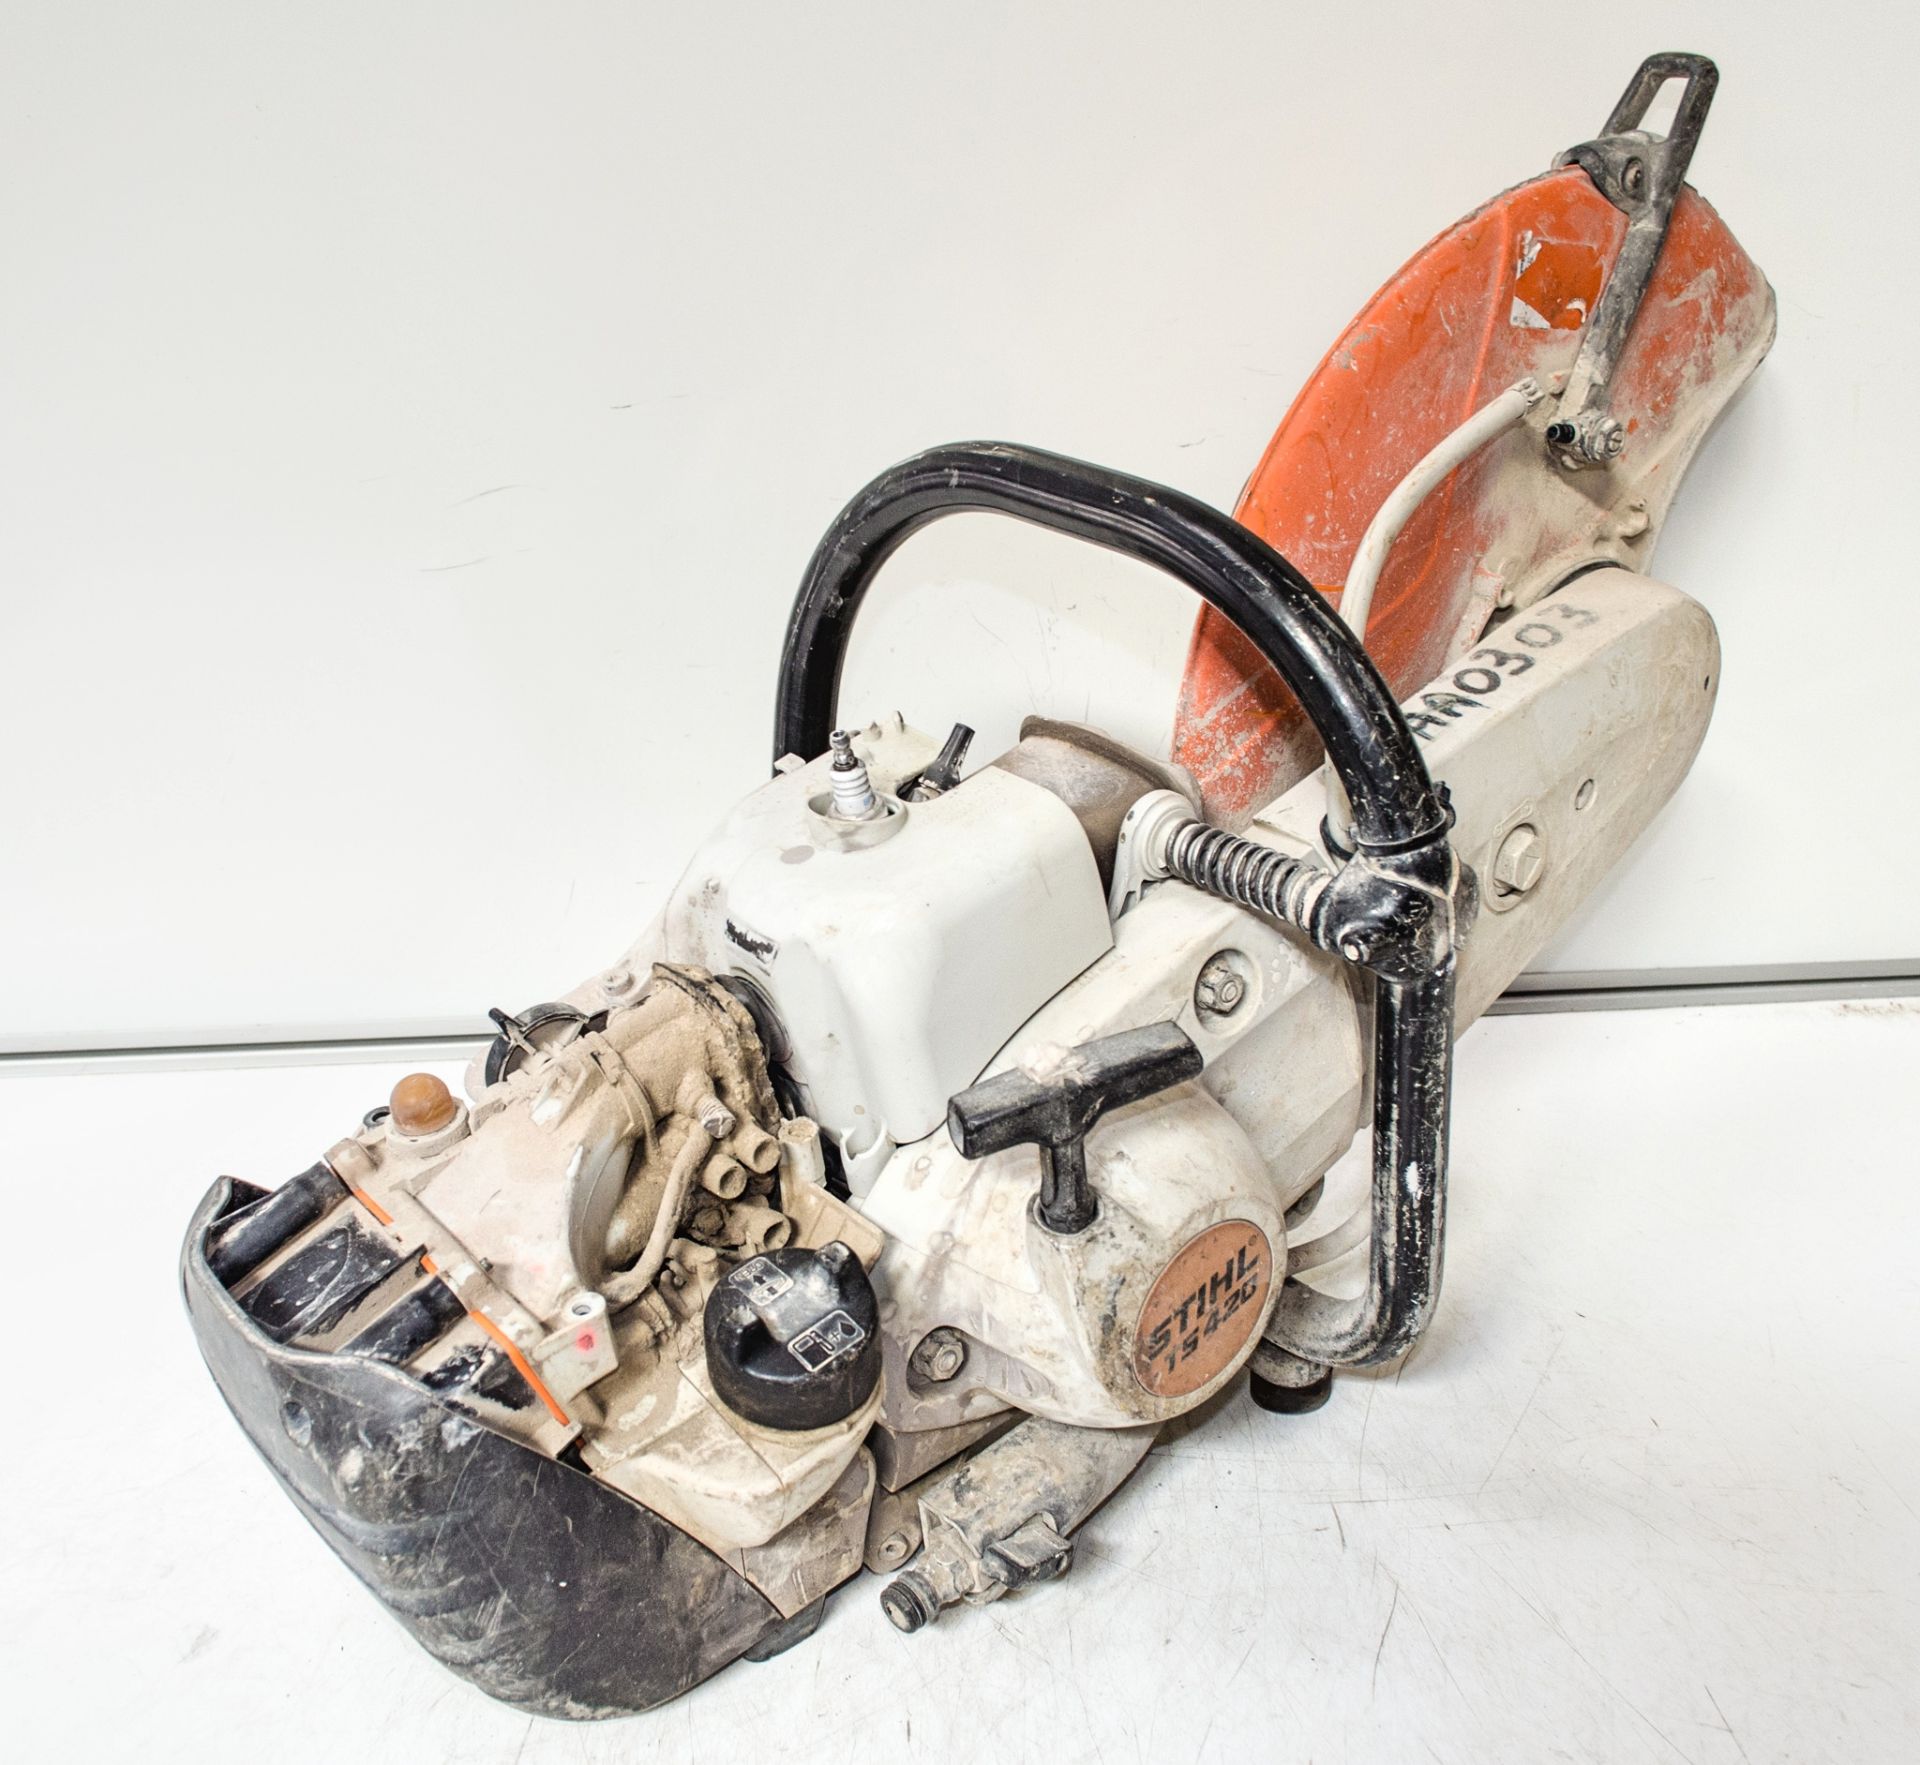 Stihl TS410 petrol driven cut off saw ** Cover and other parts missing ** 02AA0303 - Image 2 of 2